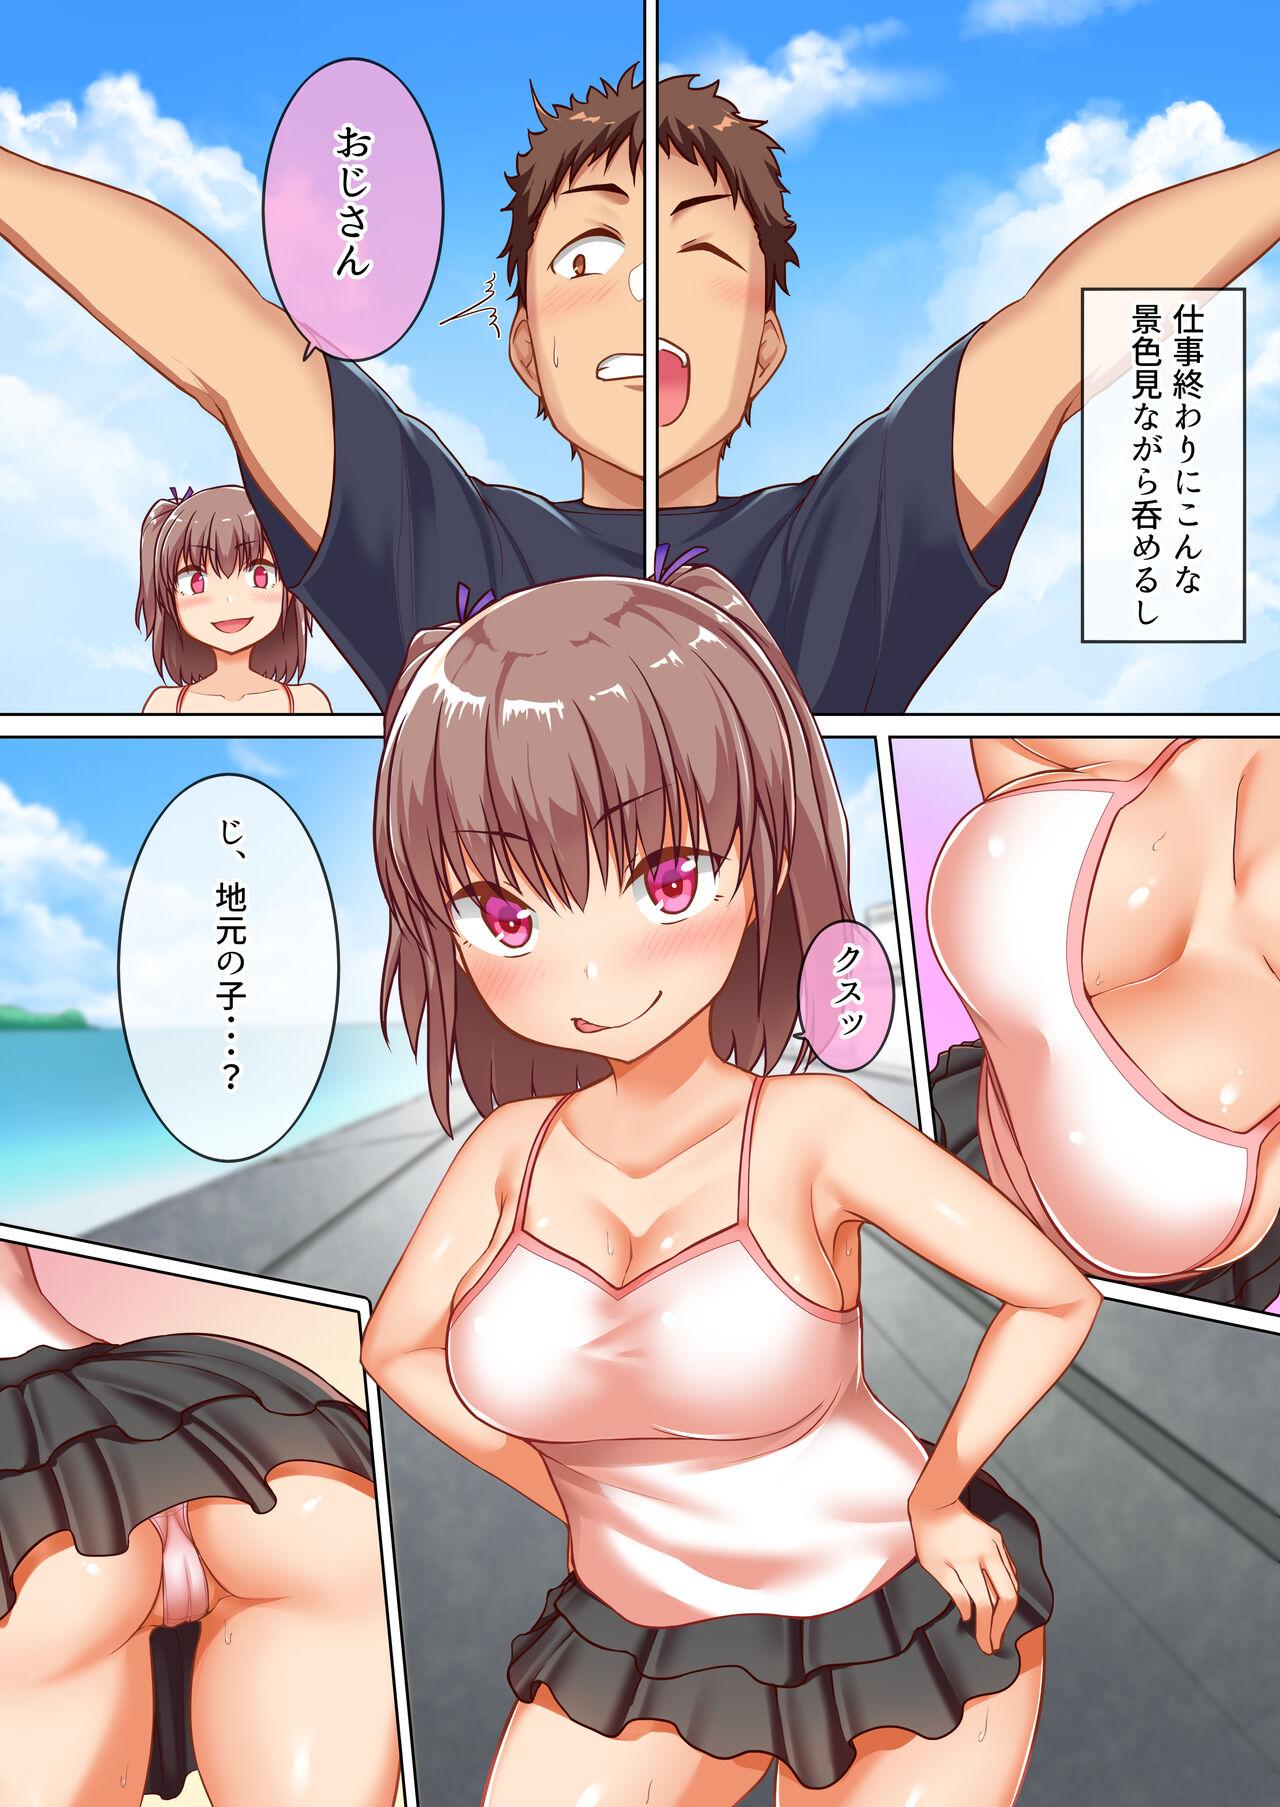 Mujer 巨乳メスガキたちと真夏の島で種付けし放題な汁だくドスケベリモート性活♪ Ass To Mouth - Page 5